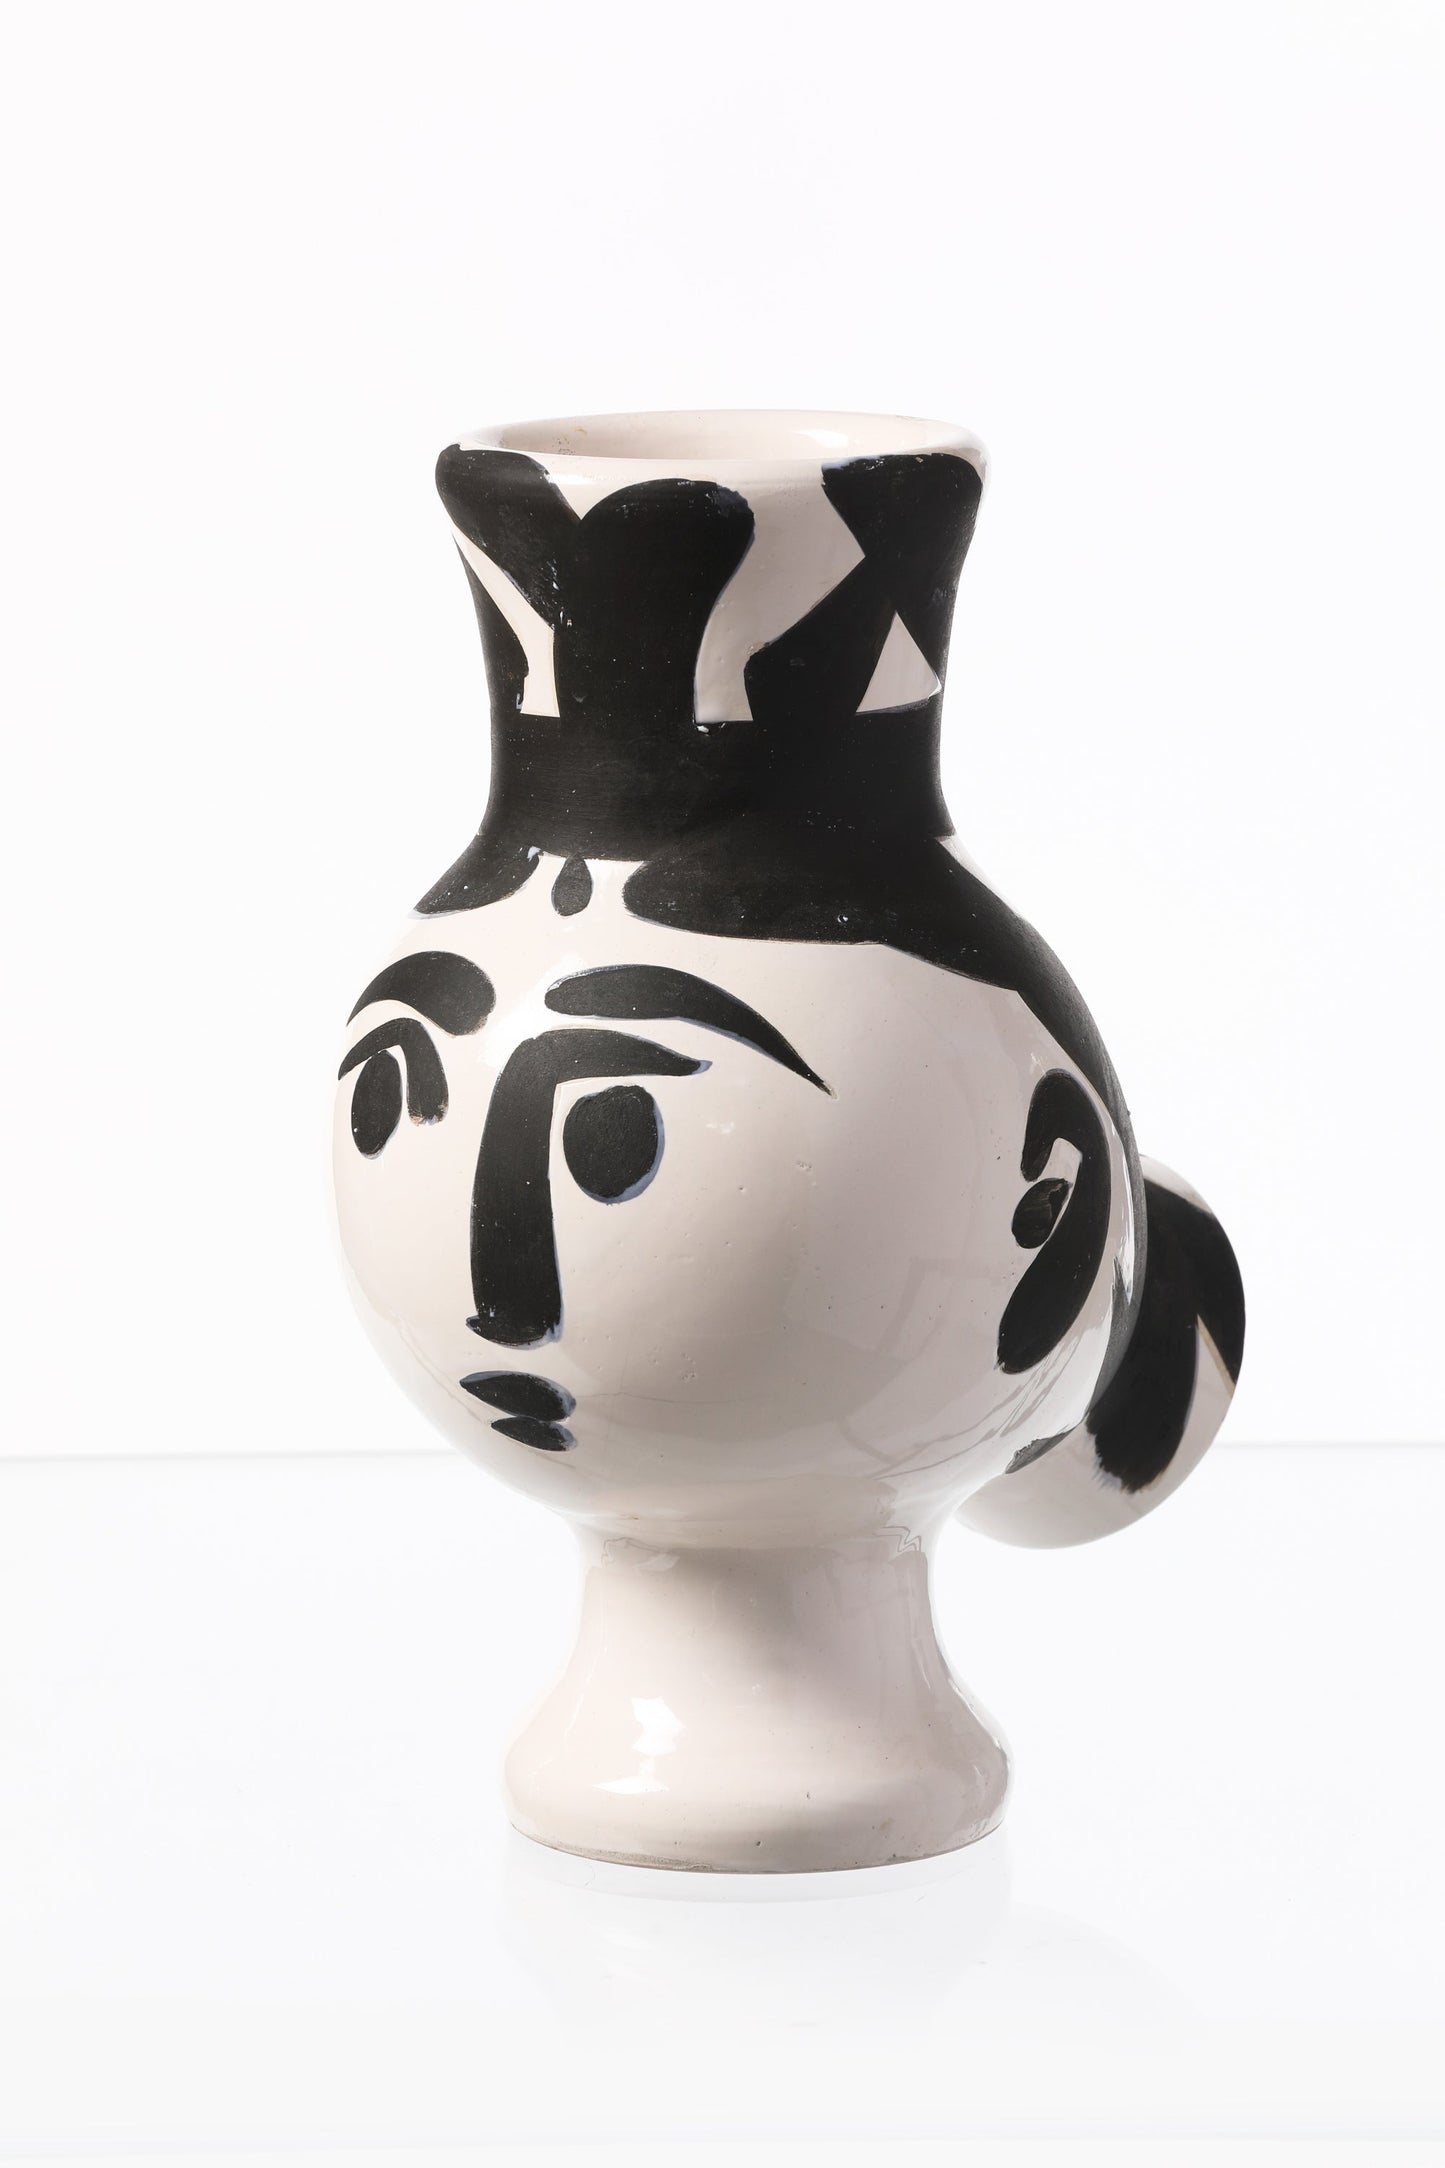 Pablo Picasso vase for Madoura Femme Chouette 1951